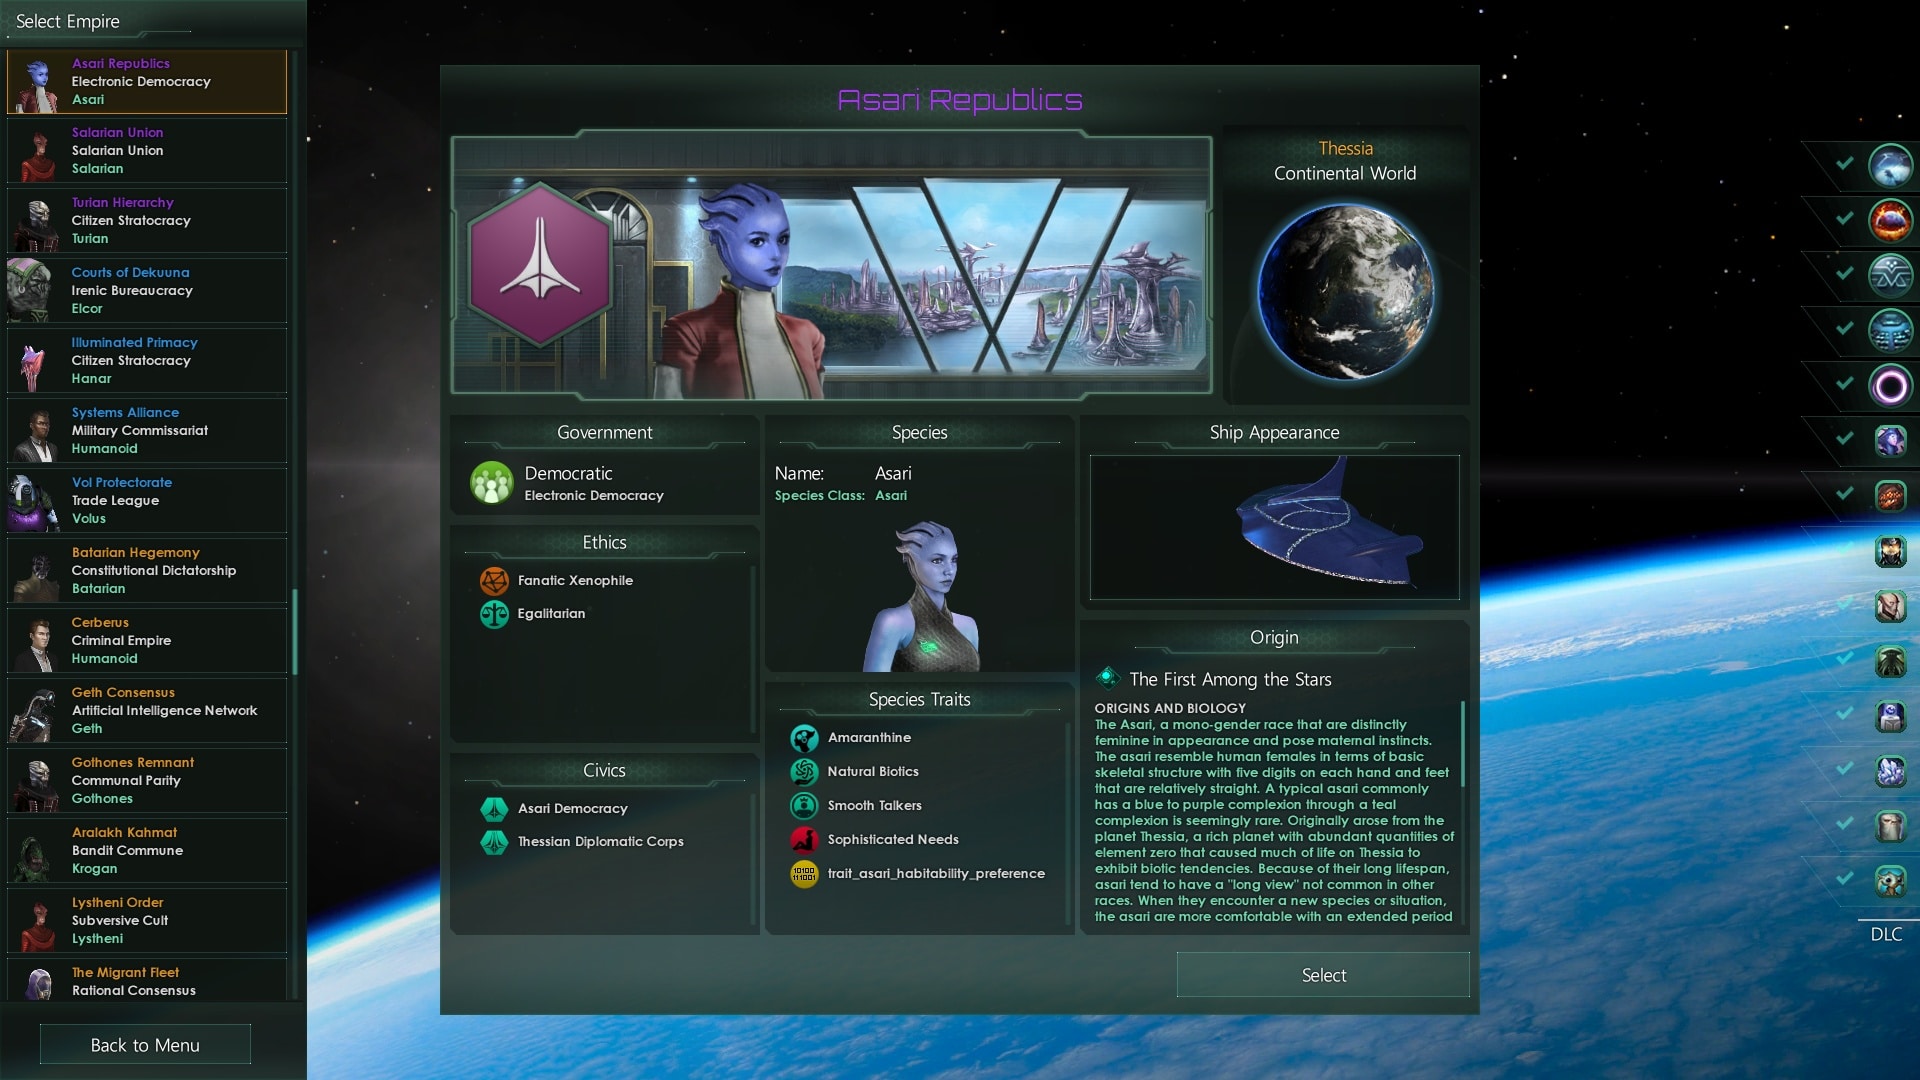 (All known factions such as the Asari have been faithfully reproduced in the game.)